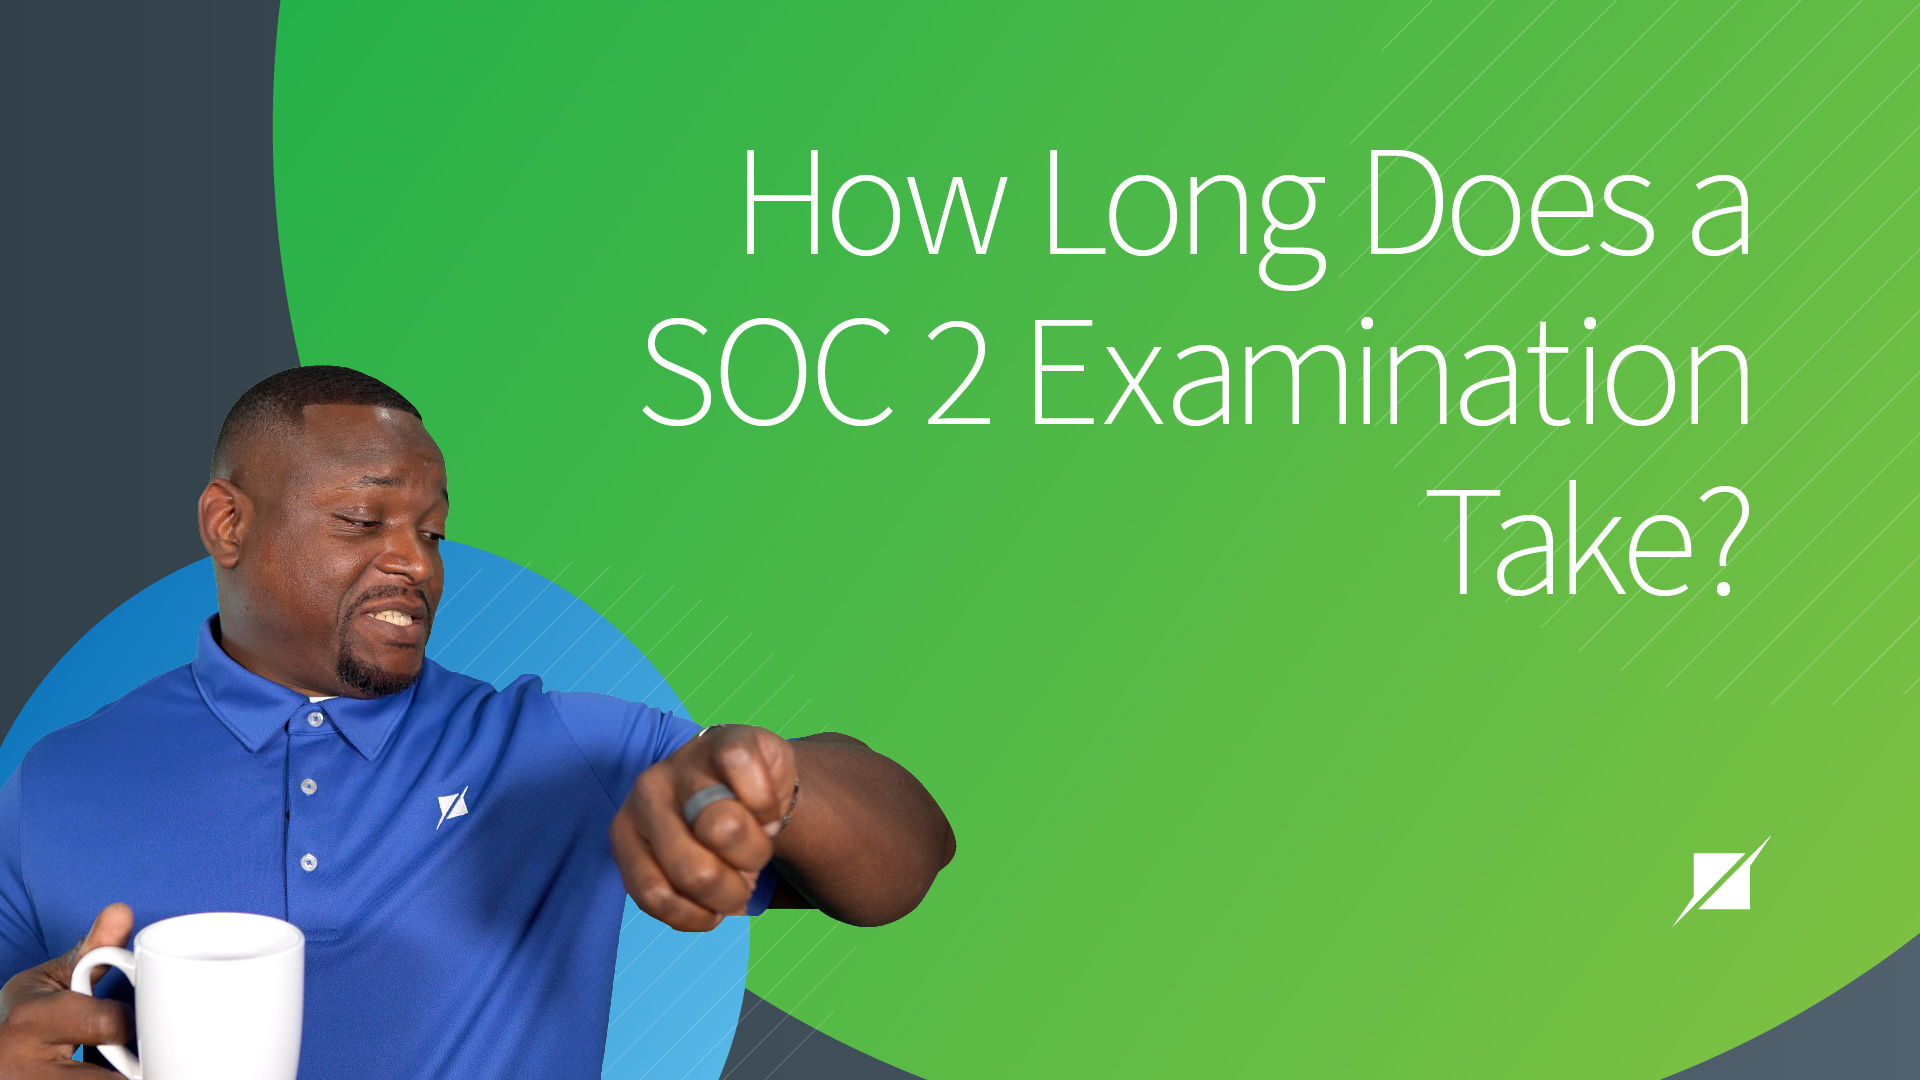 how-long-does-a-soc-2-examination-take-schellman